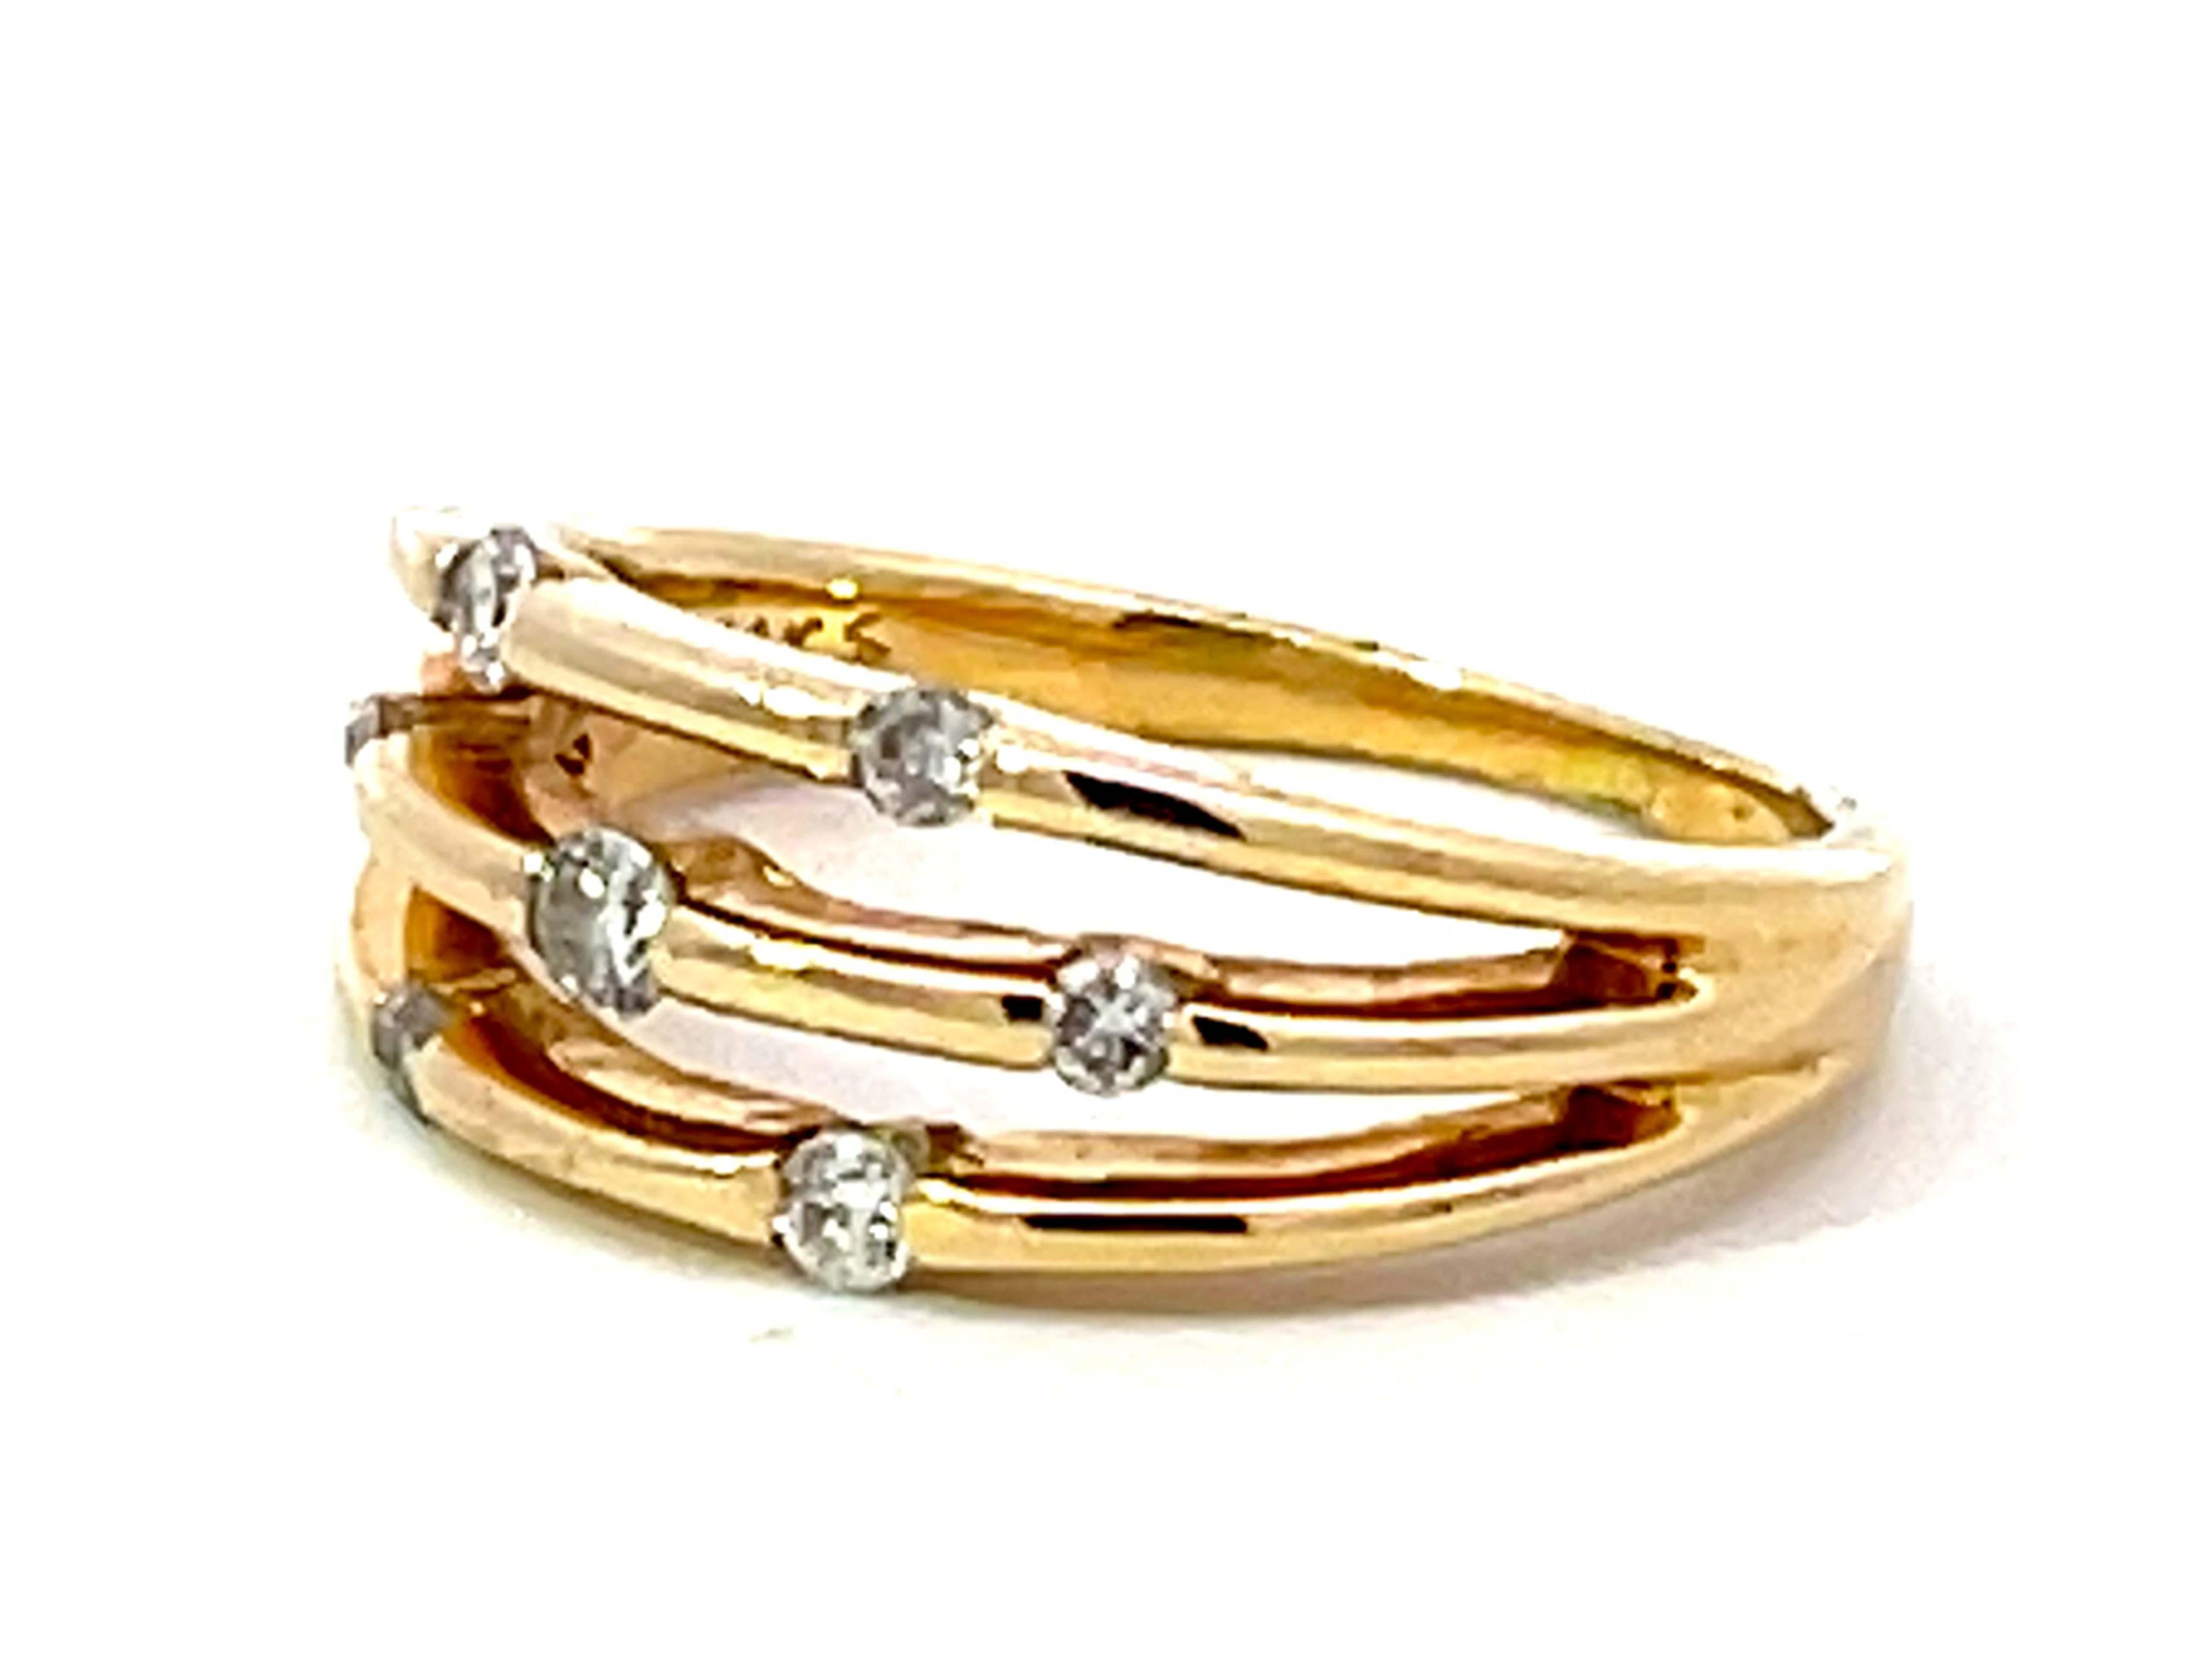 7 Brilliant Cut Diamond Three Tier Band Split Shank Ring Solid 14k Yellow Gold In New Condition For Sale In Honolulu, HI